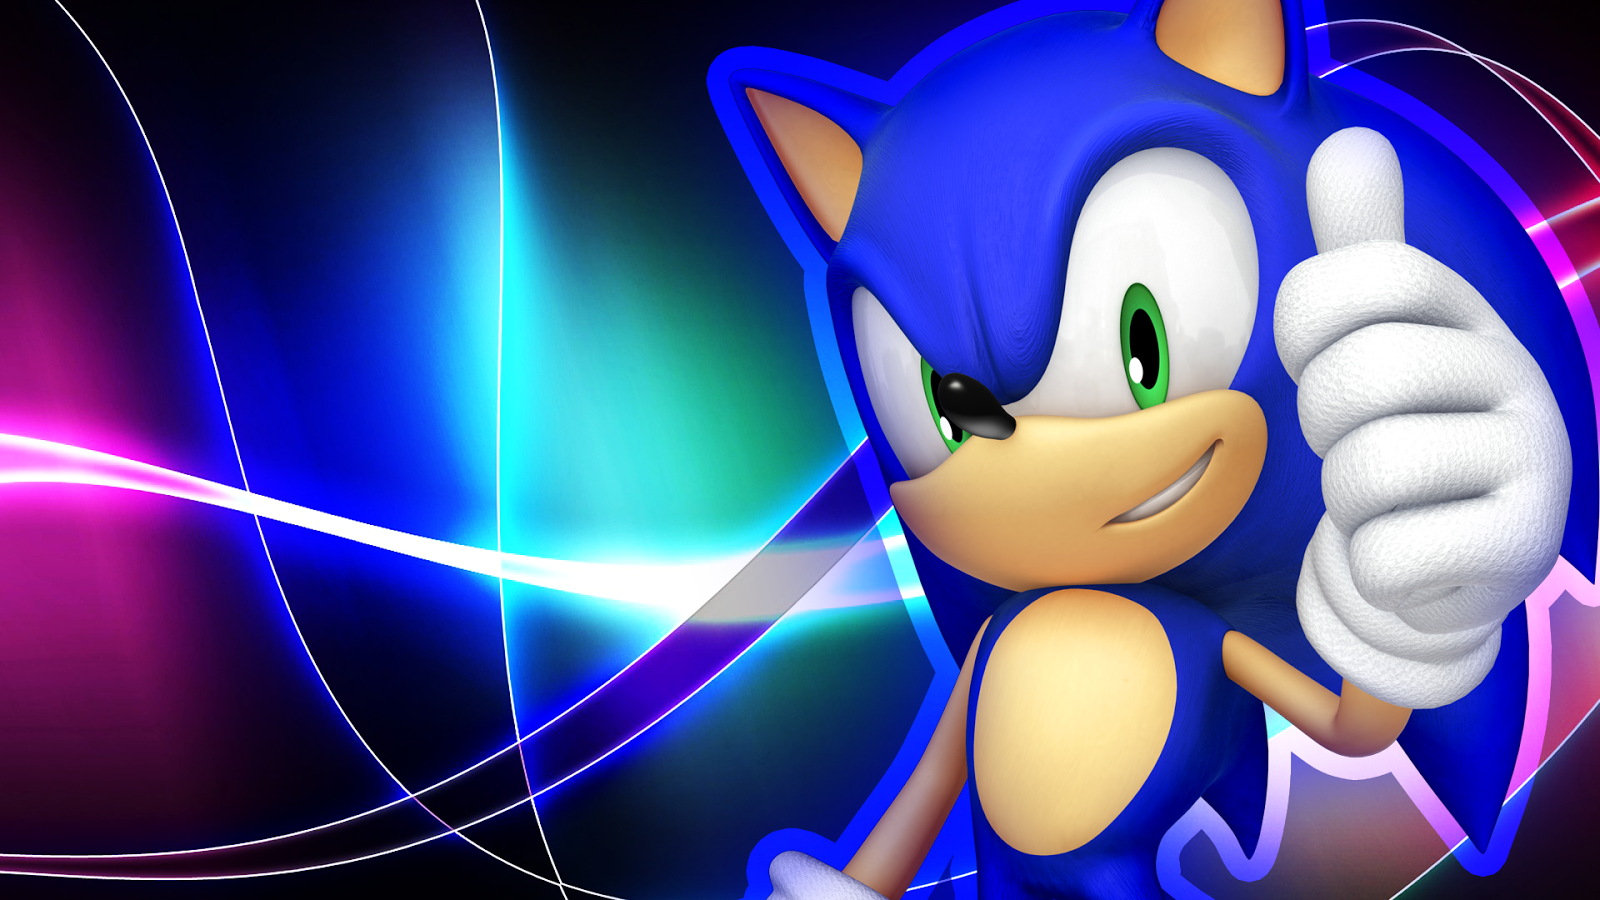 Sonic The Hedgehog Wallpaper 2013 Images amp Pictures   Becuo